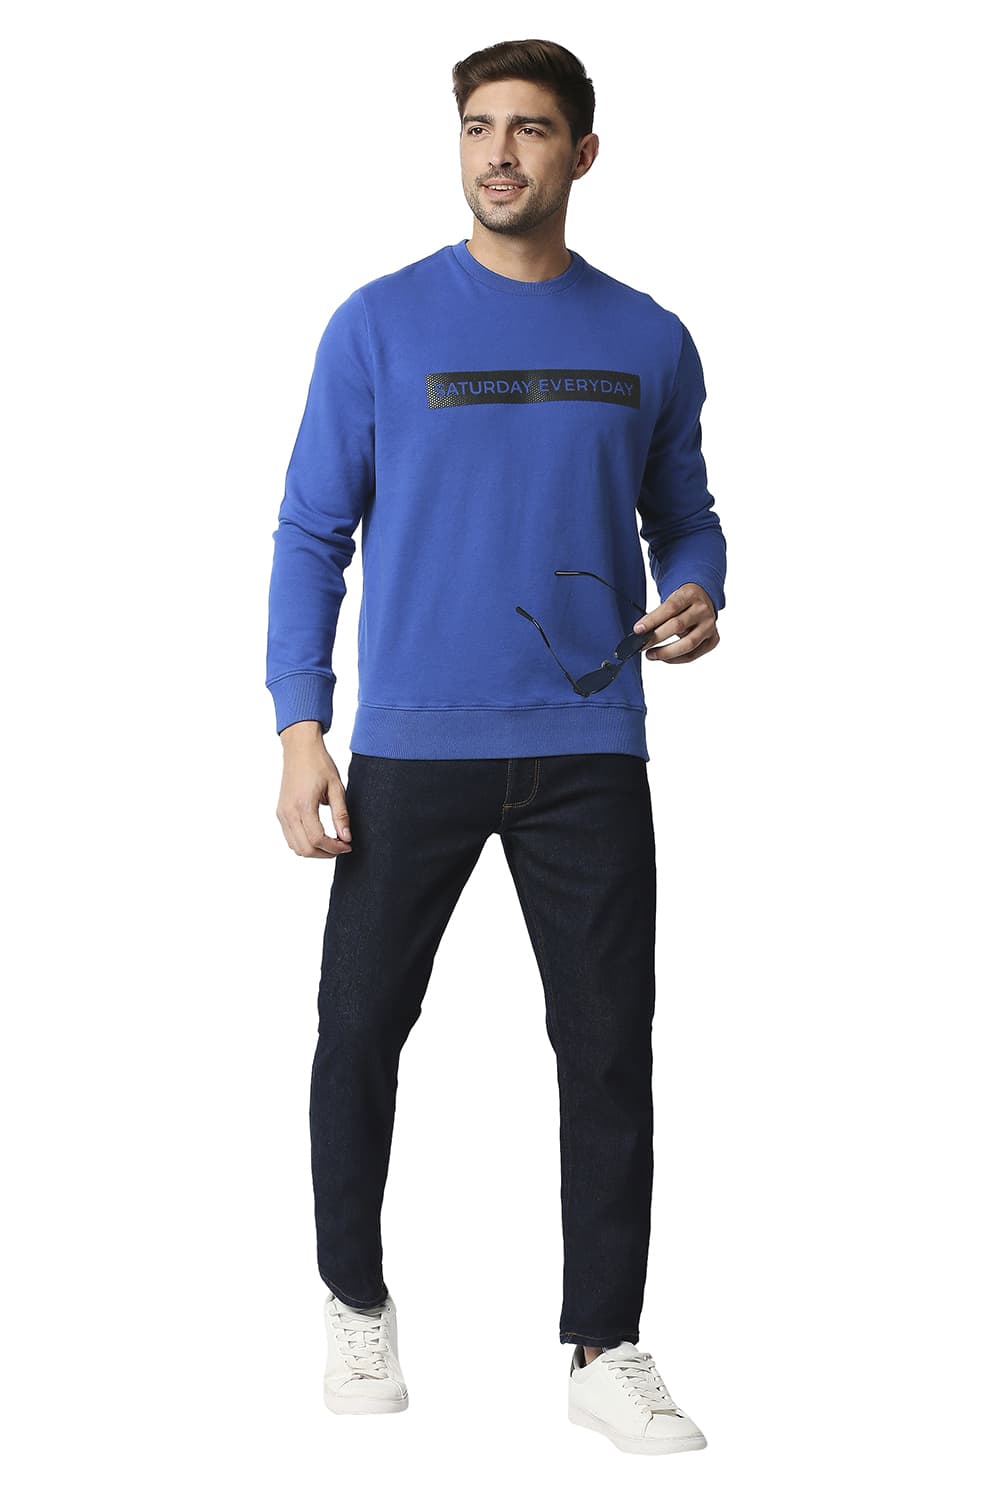 BASICS MUSCLE FIT LOOP KNIT PULLOVER SWEATER